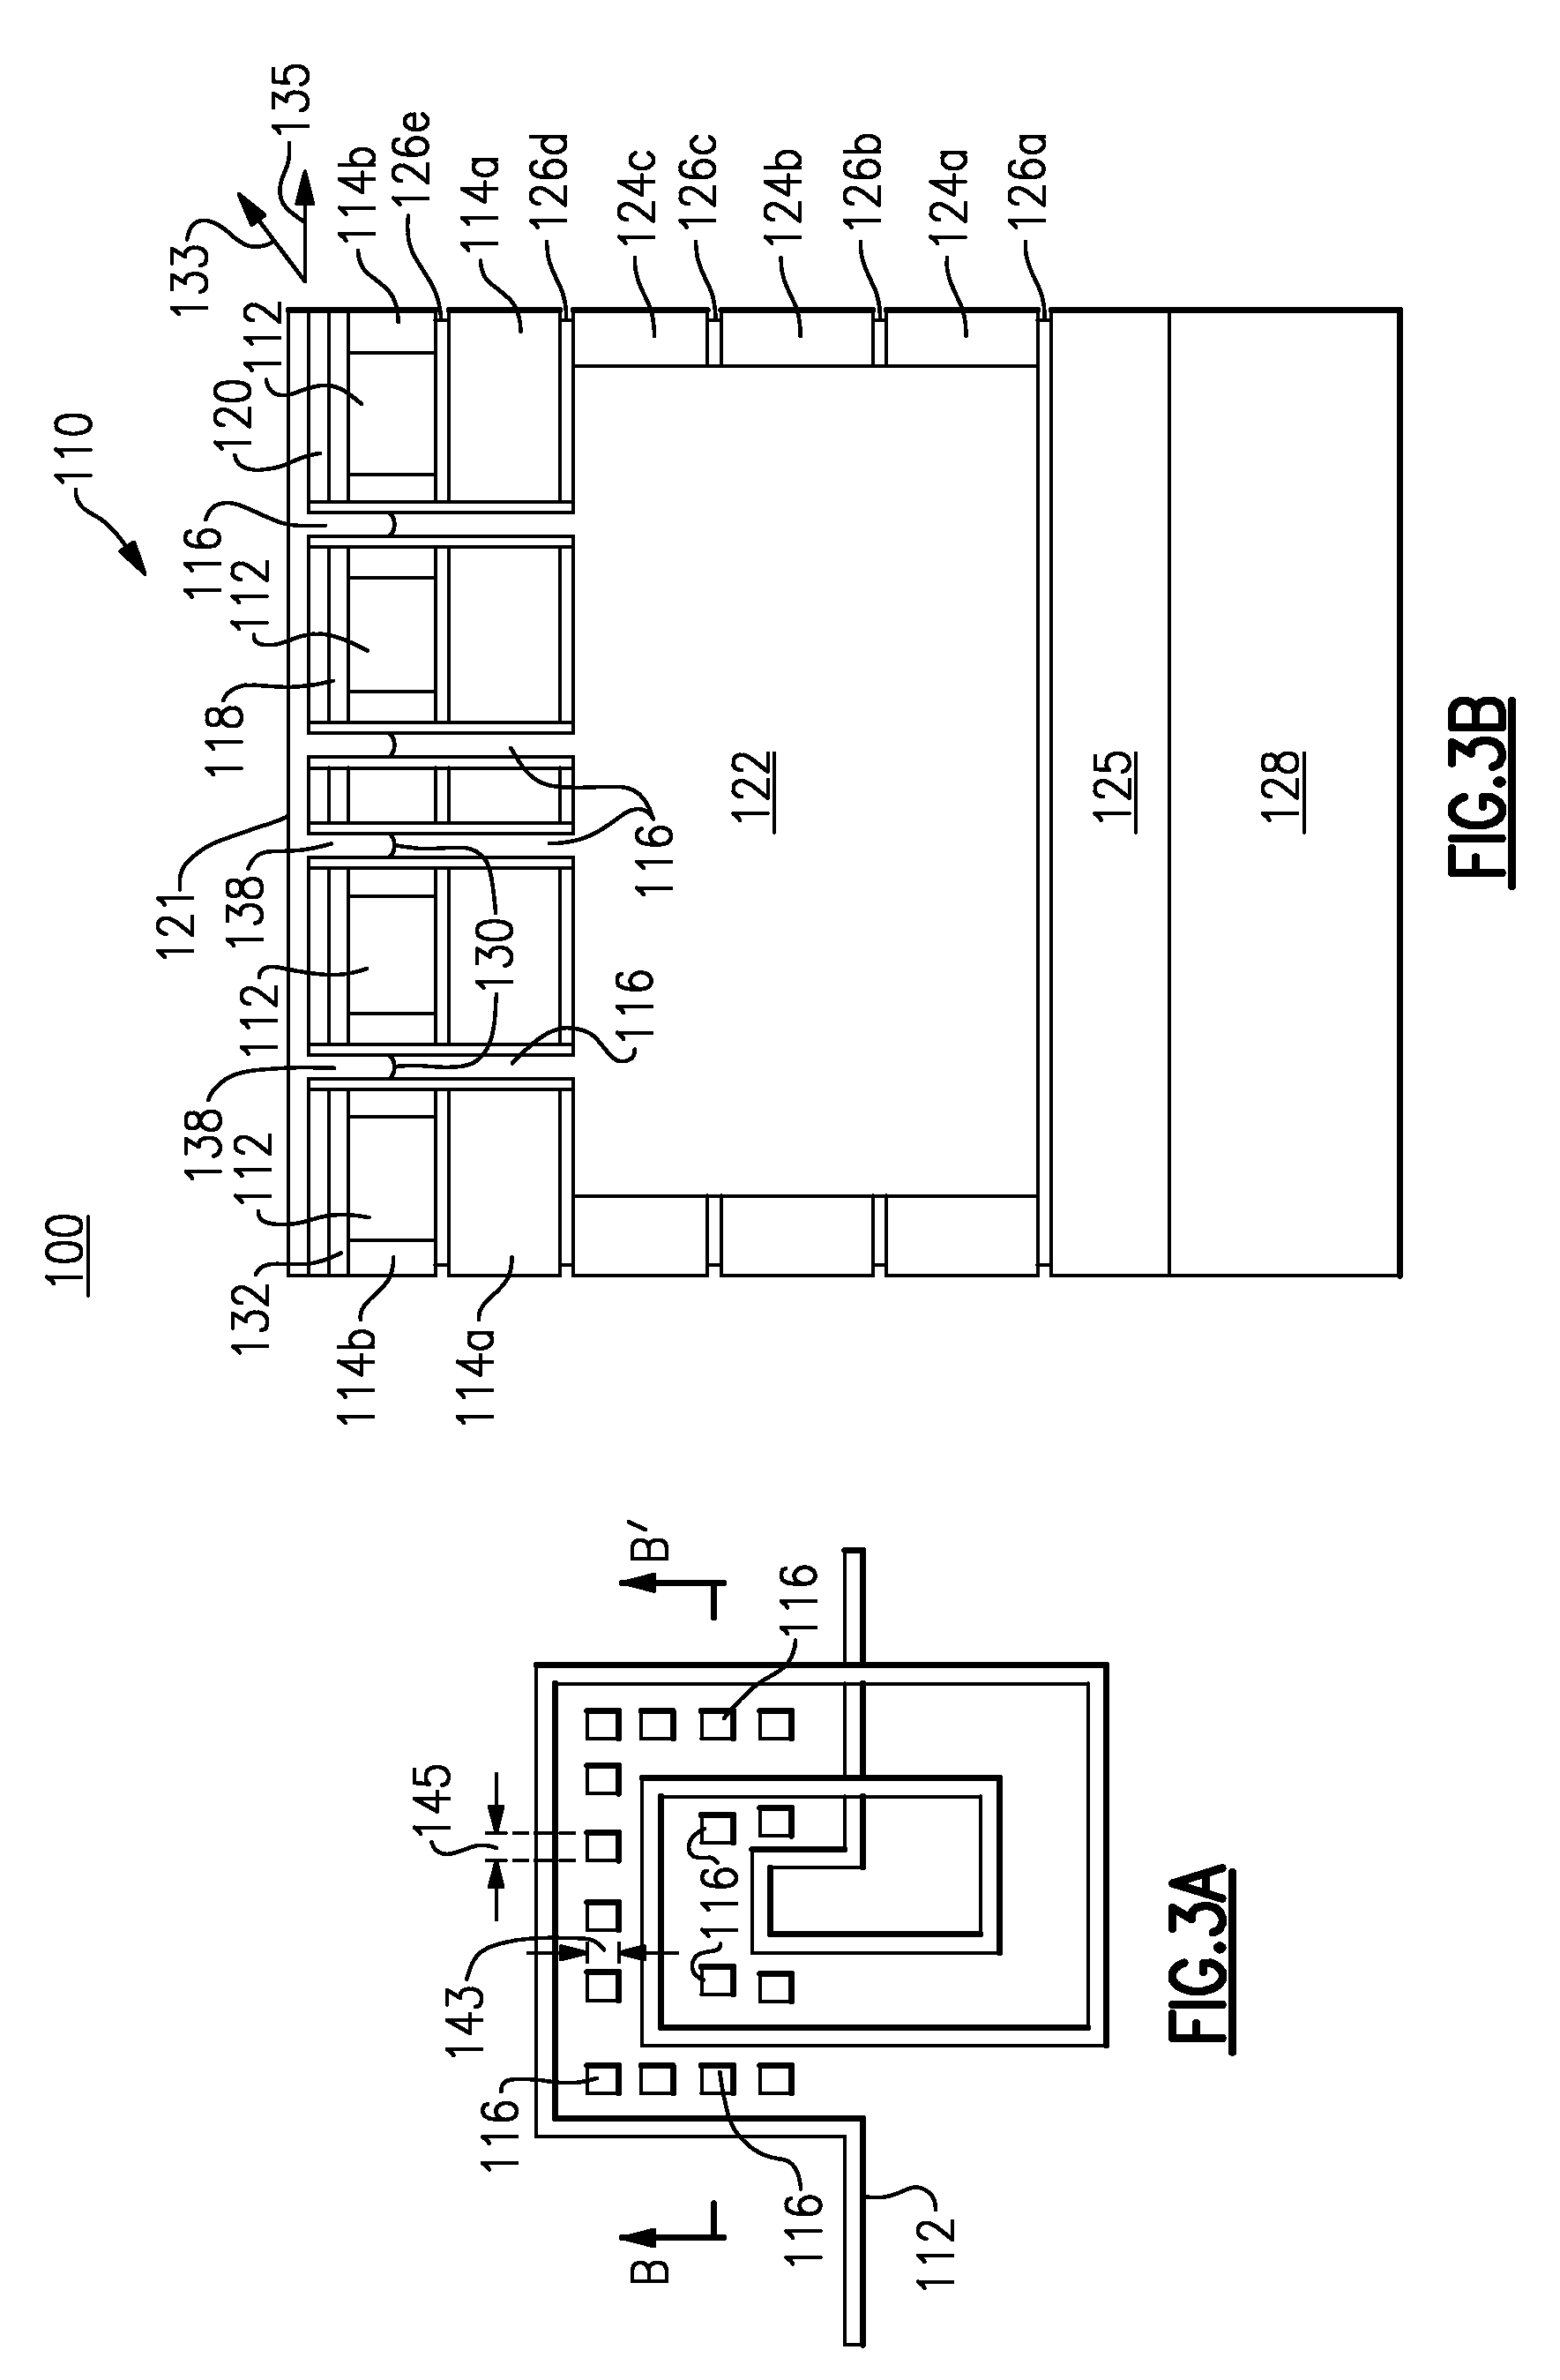 Air gap under on-chip passive device